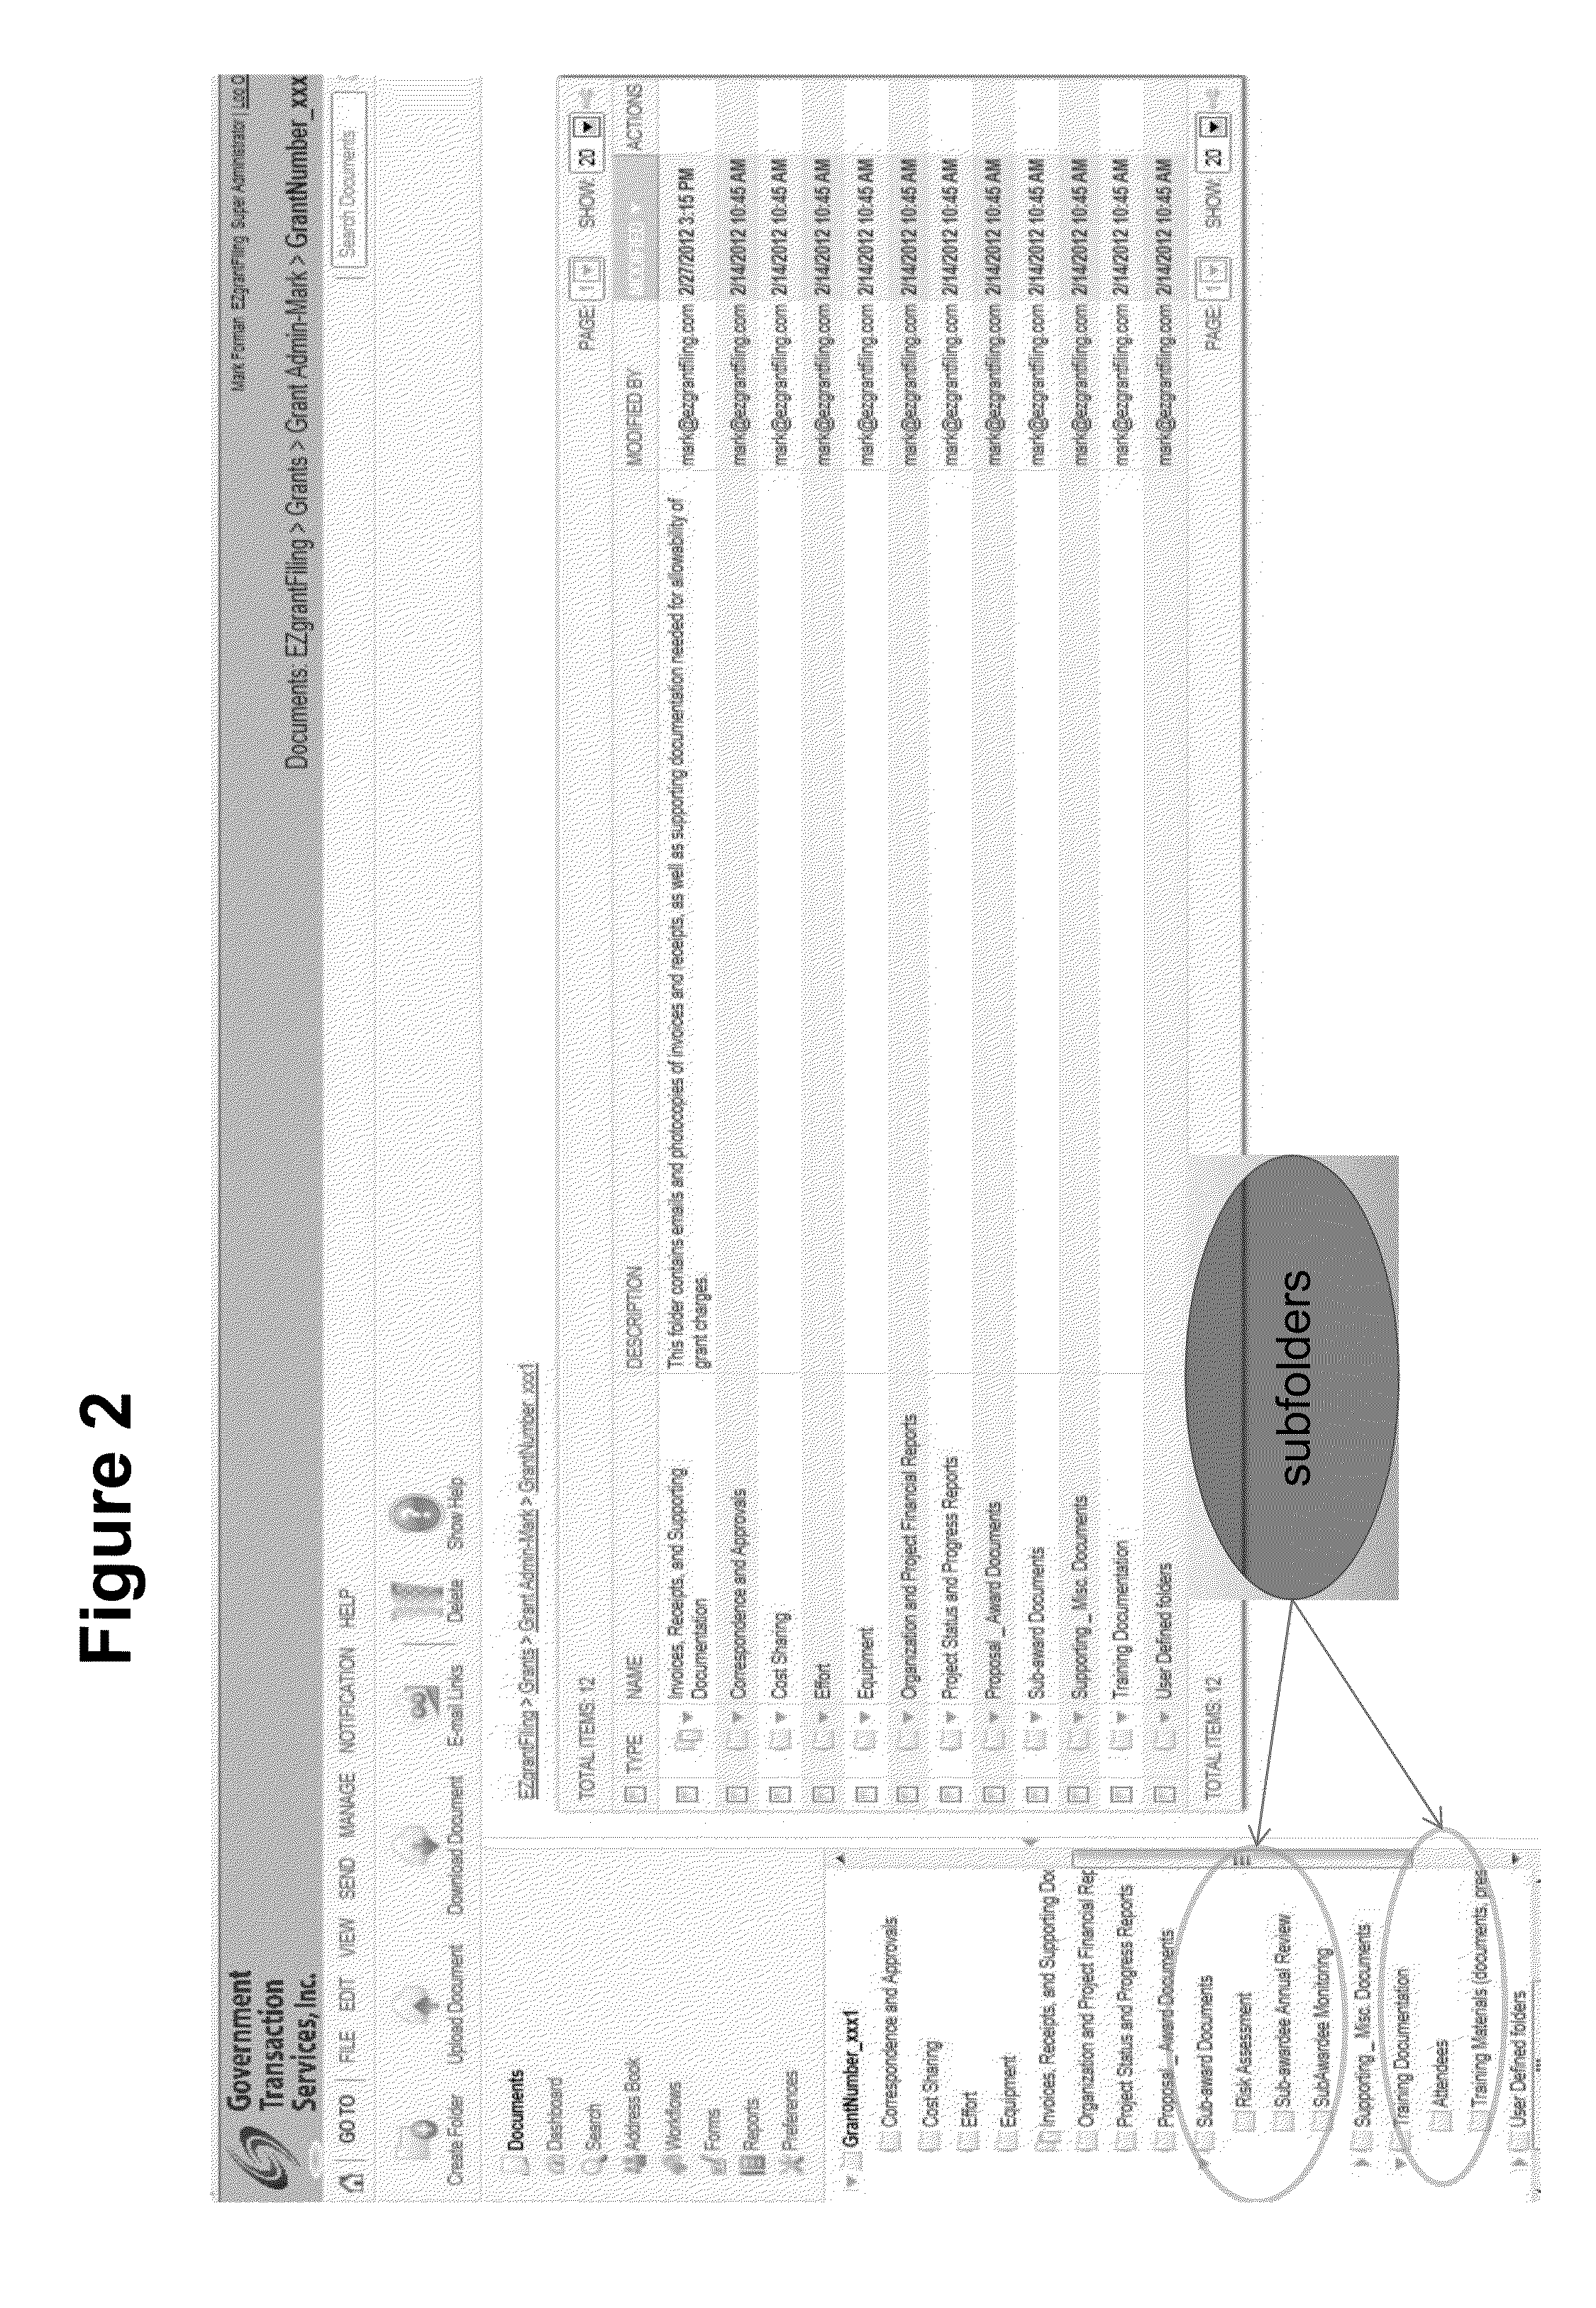 System and Method for Integrated Use of Shared Hardware, Software and Storage Resources Communicating Through a Network to Standardize and Simplify Transactions Between an Organization and Entities That Do Business With The Organization